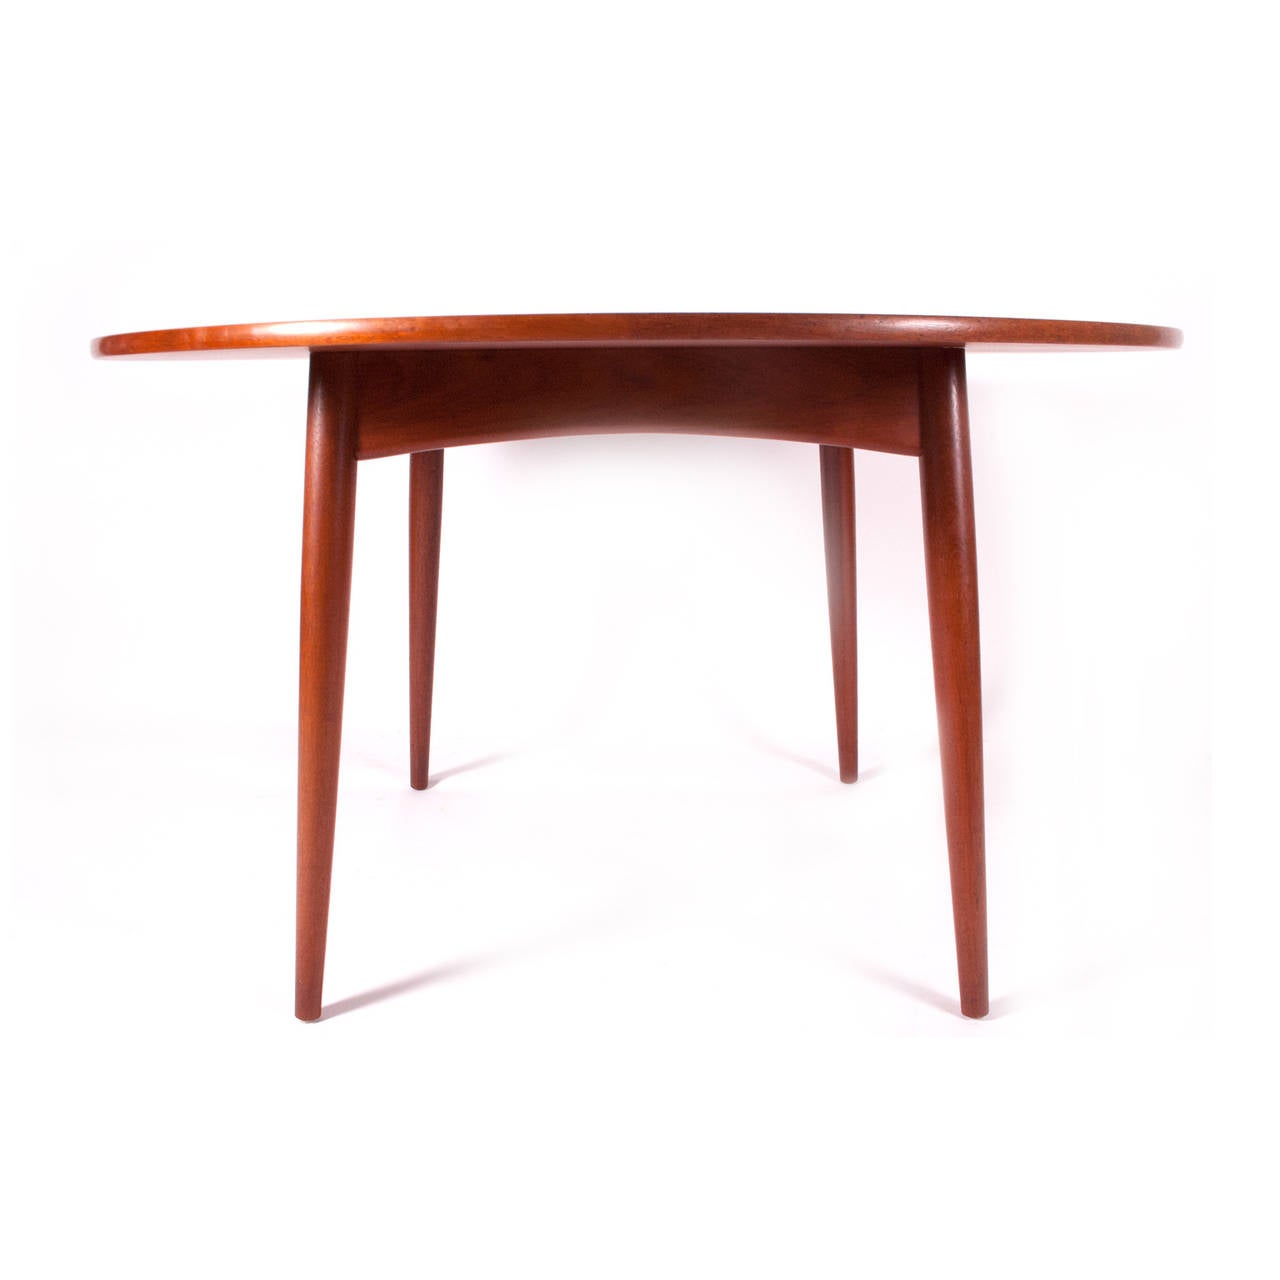 Simple round teak dining table design by Hans Wegner for Andreas Tuck, Denmark impress in wood, custom pads included, removable legs for shipping.